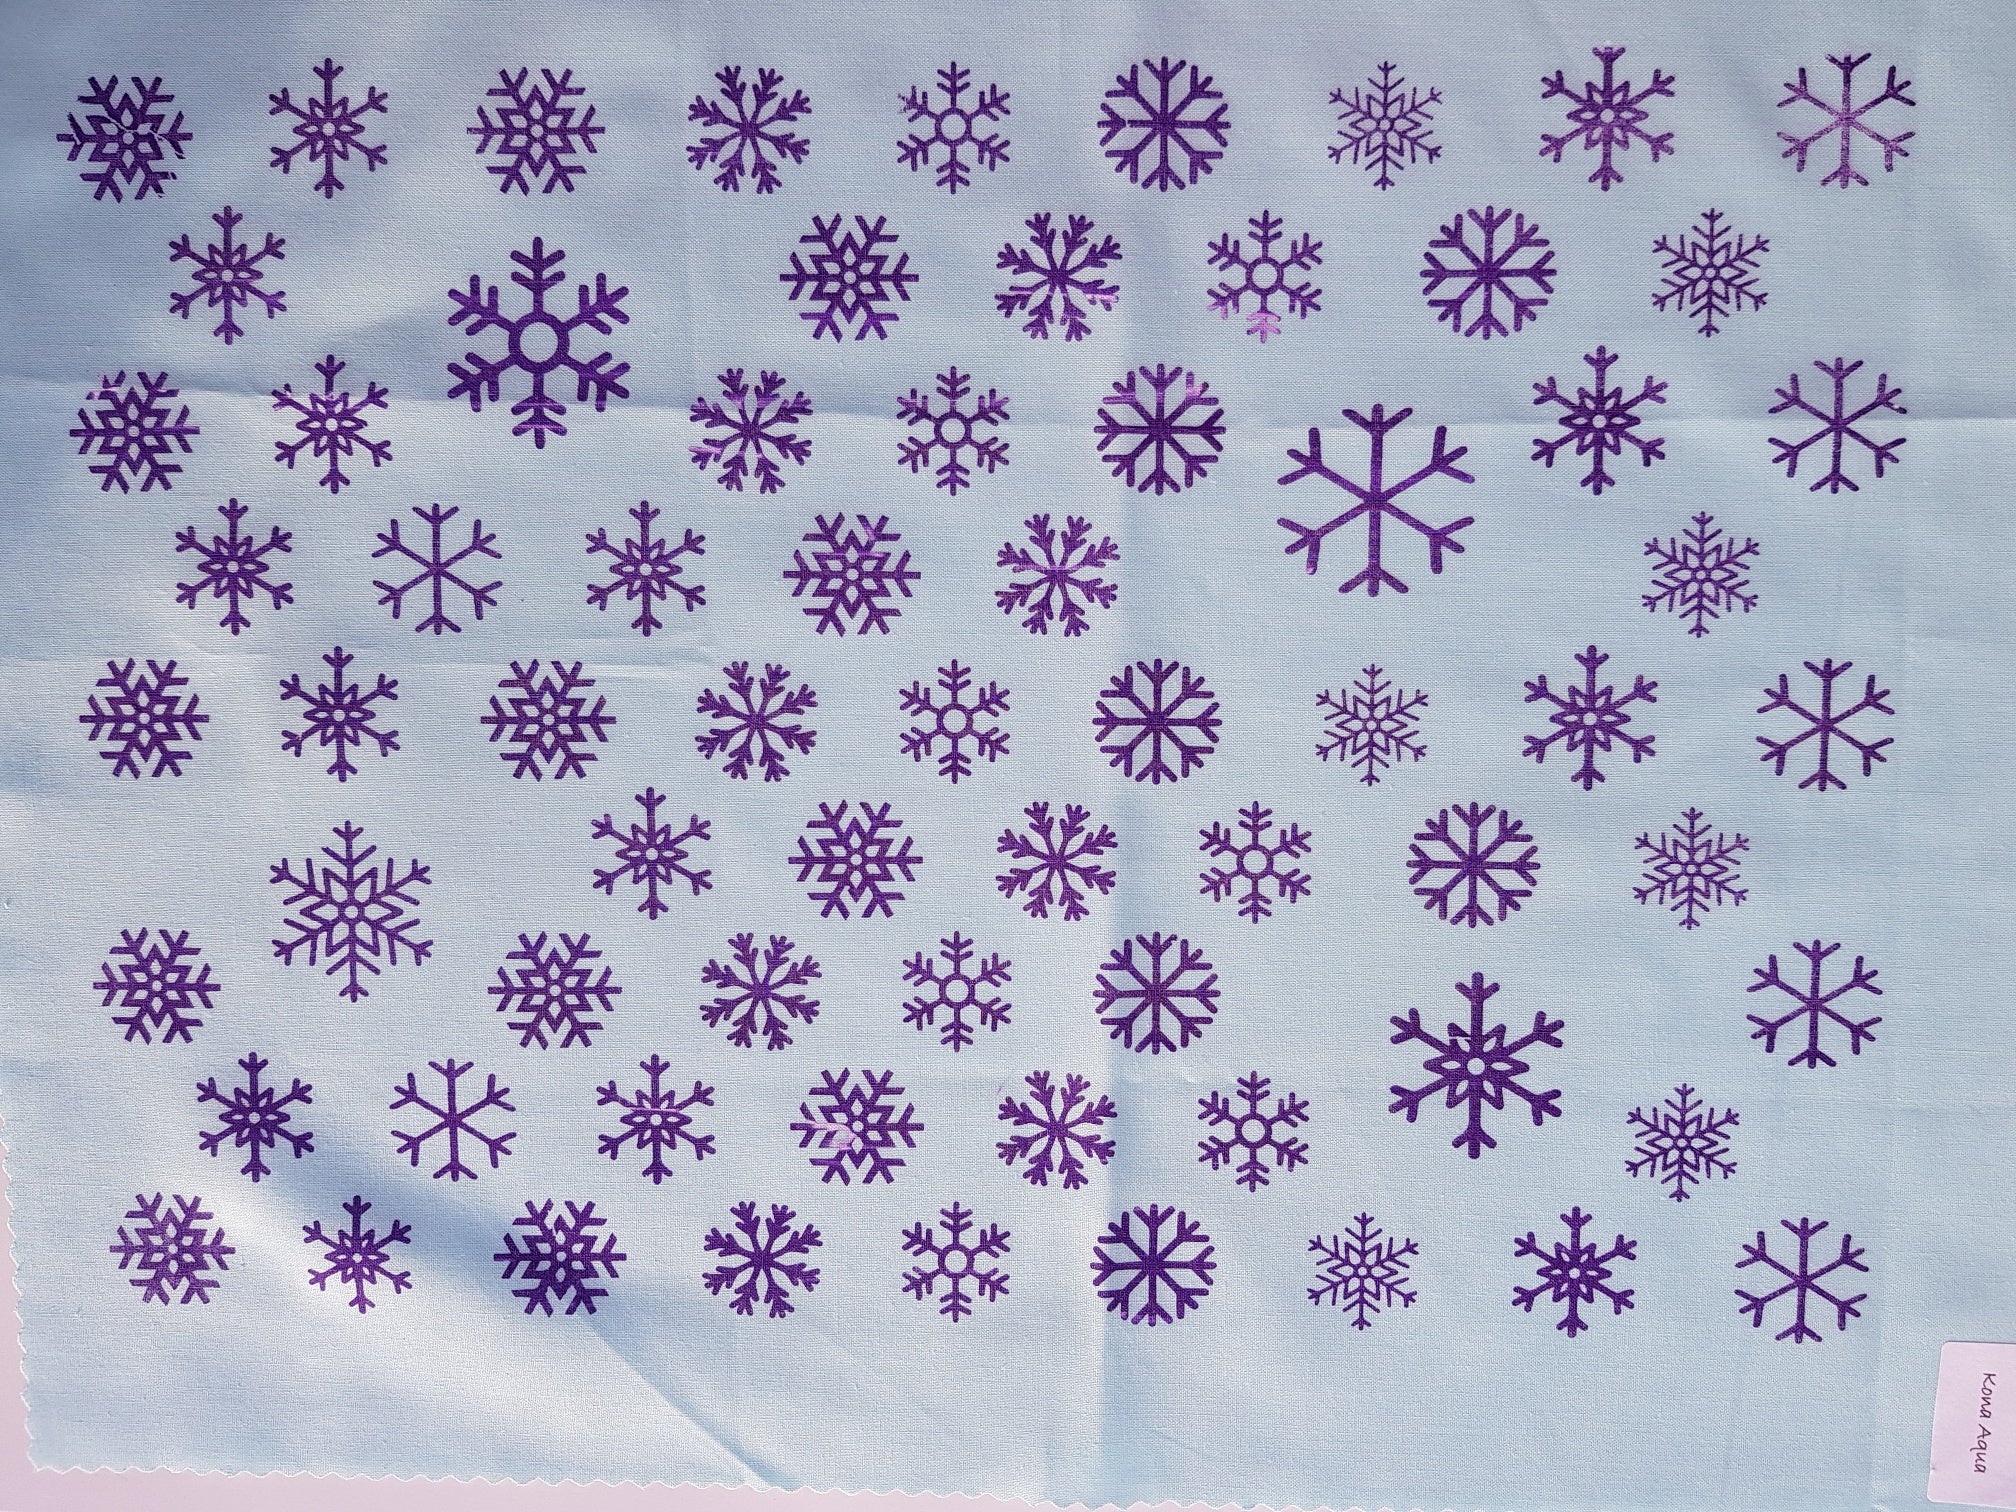 BLUE SNOWFLAKES - A Snowflake is not just for Christmas - Screen printed Kona cotton fabrics - blue snowflakes